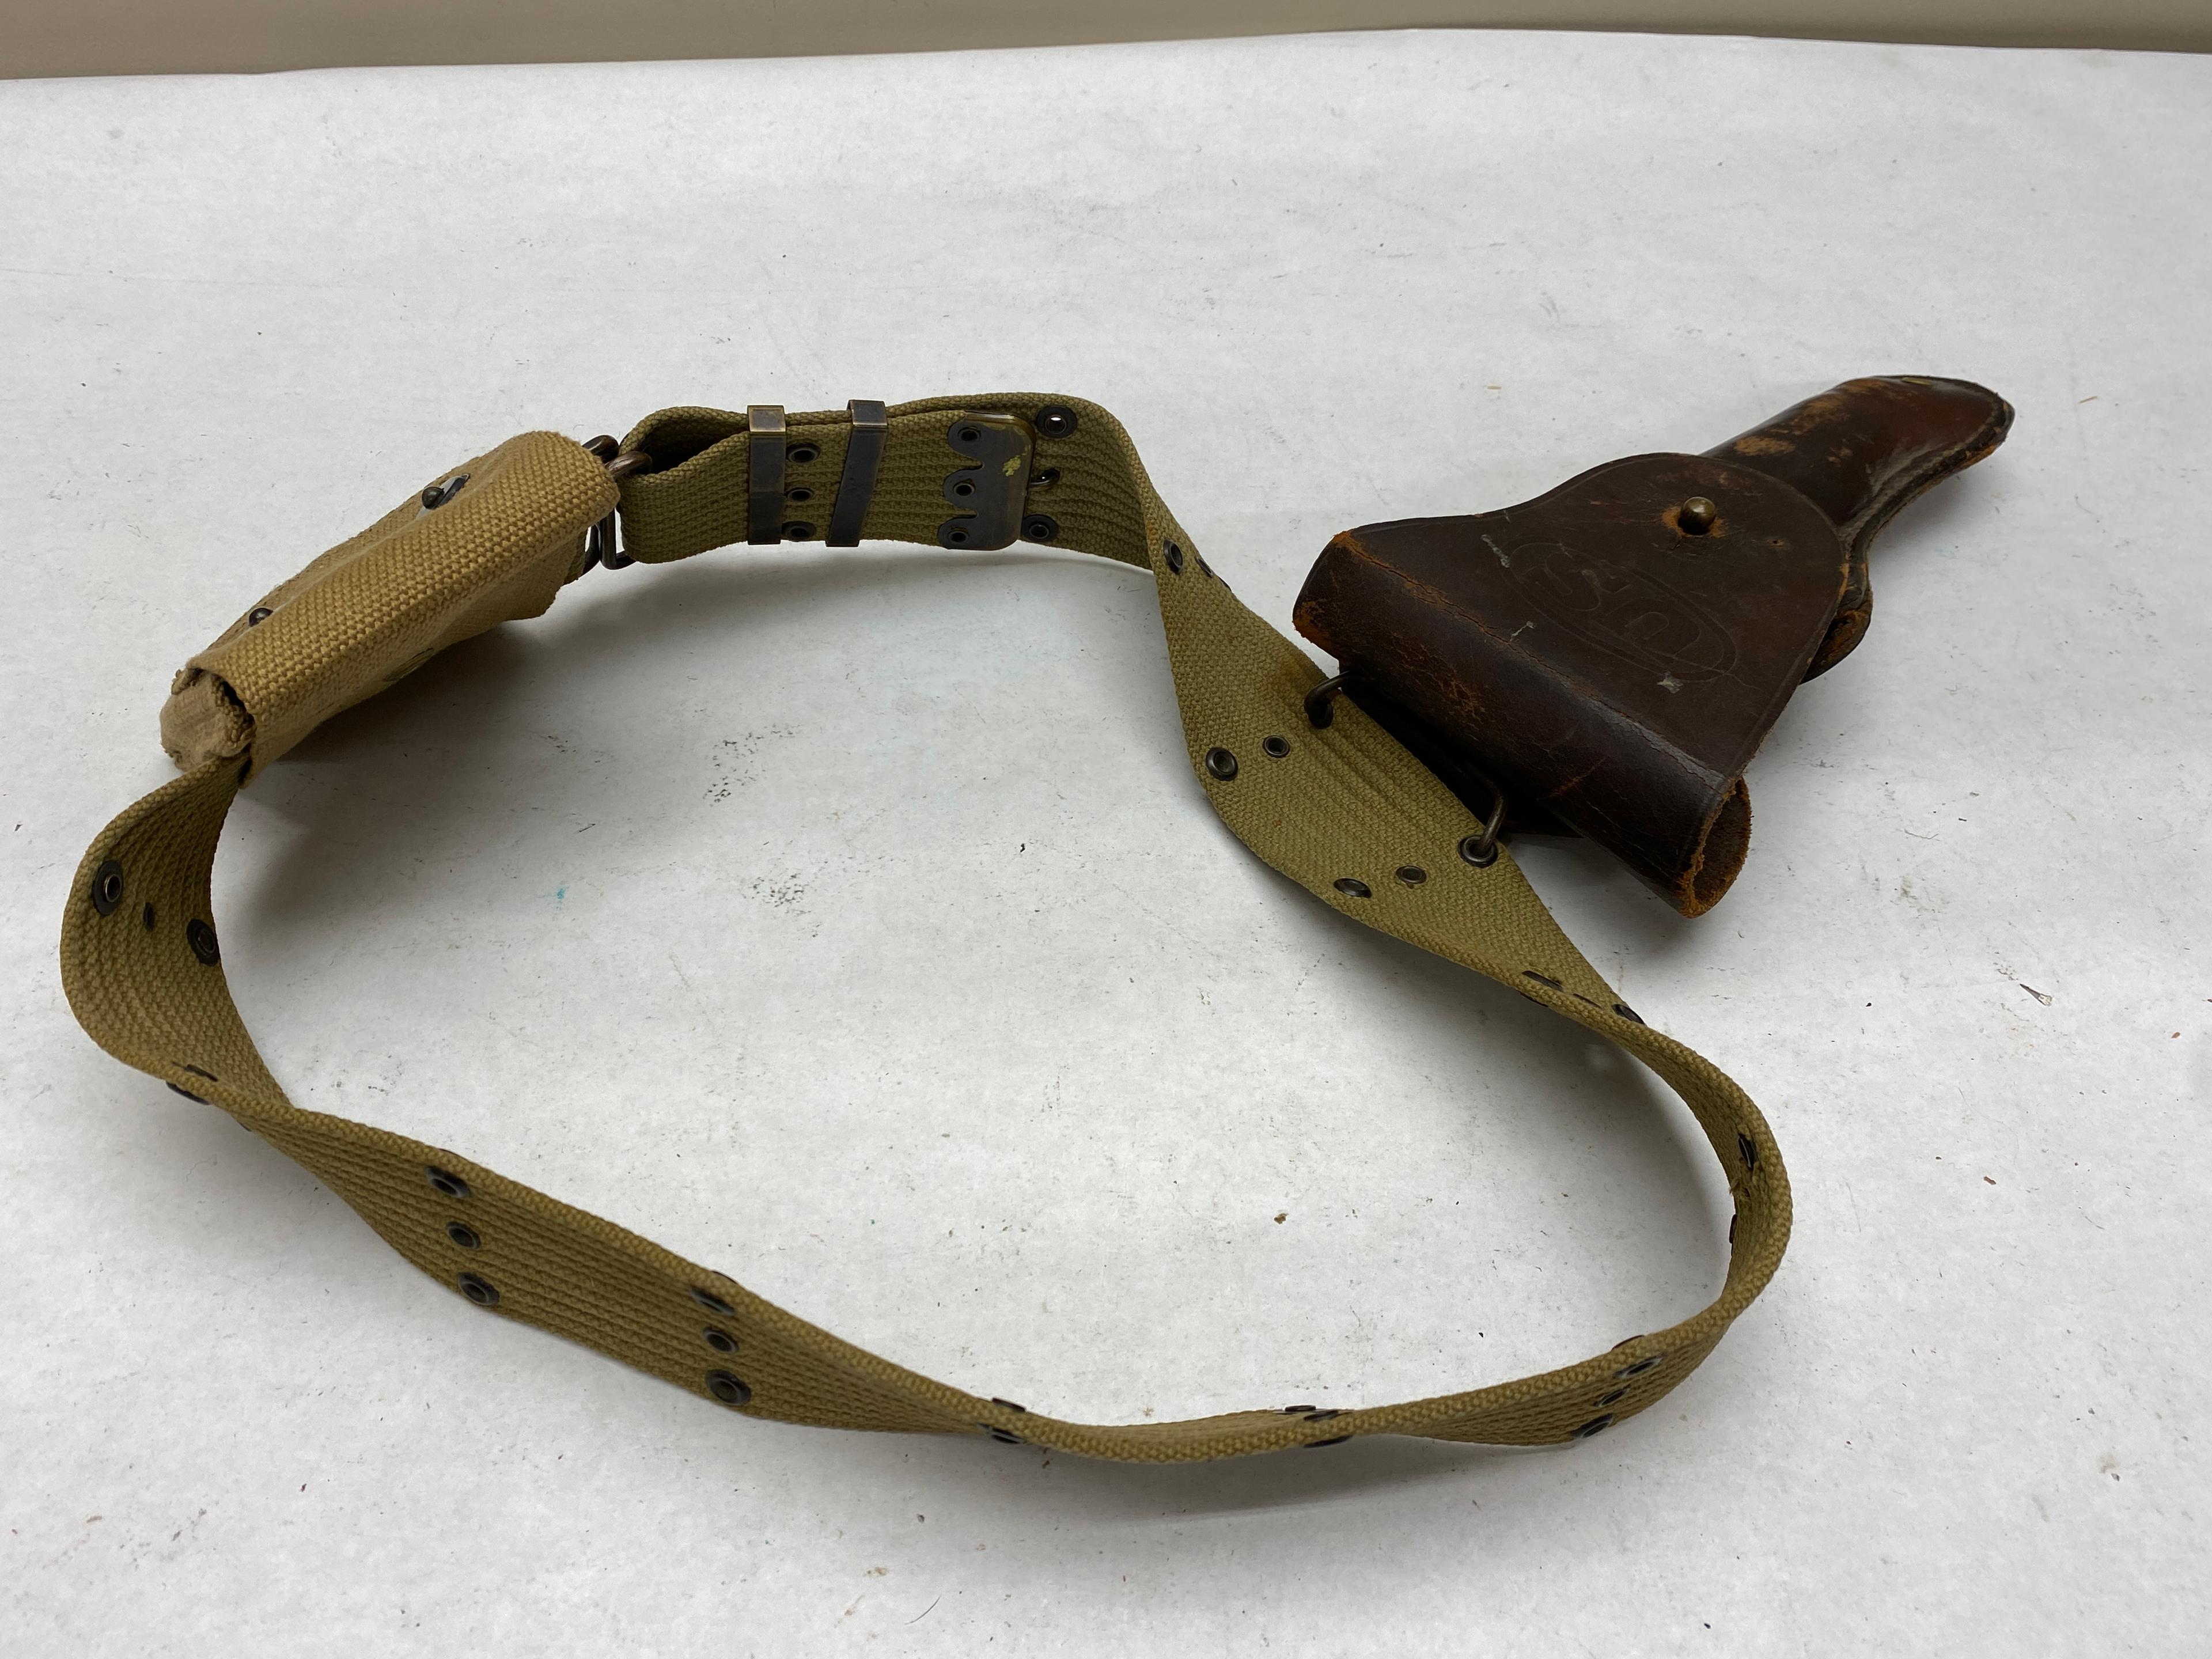 U.S. WWII ERA GUN BELT WITH HOLSTER AND MAG POUCH